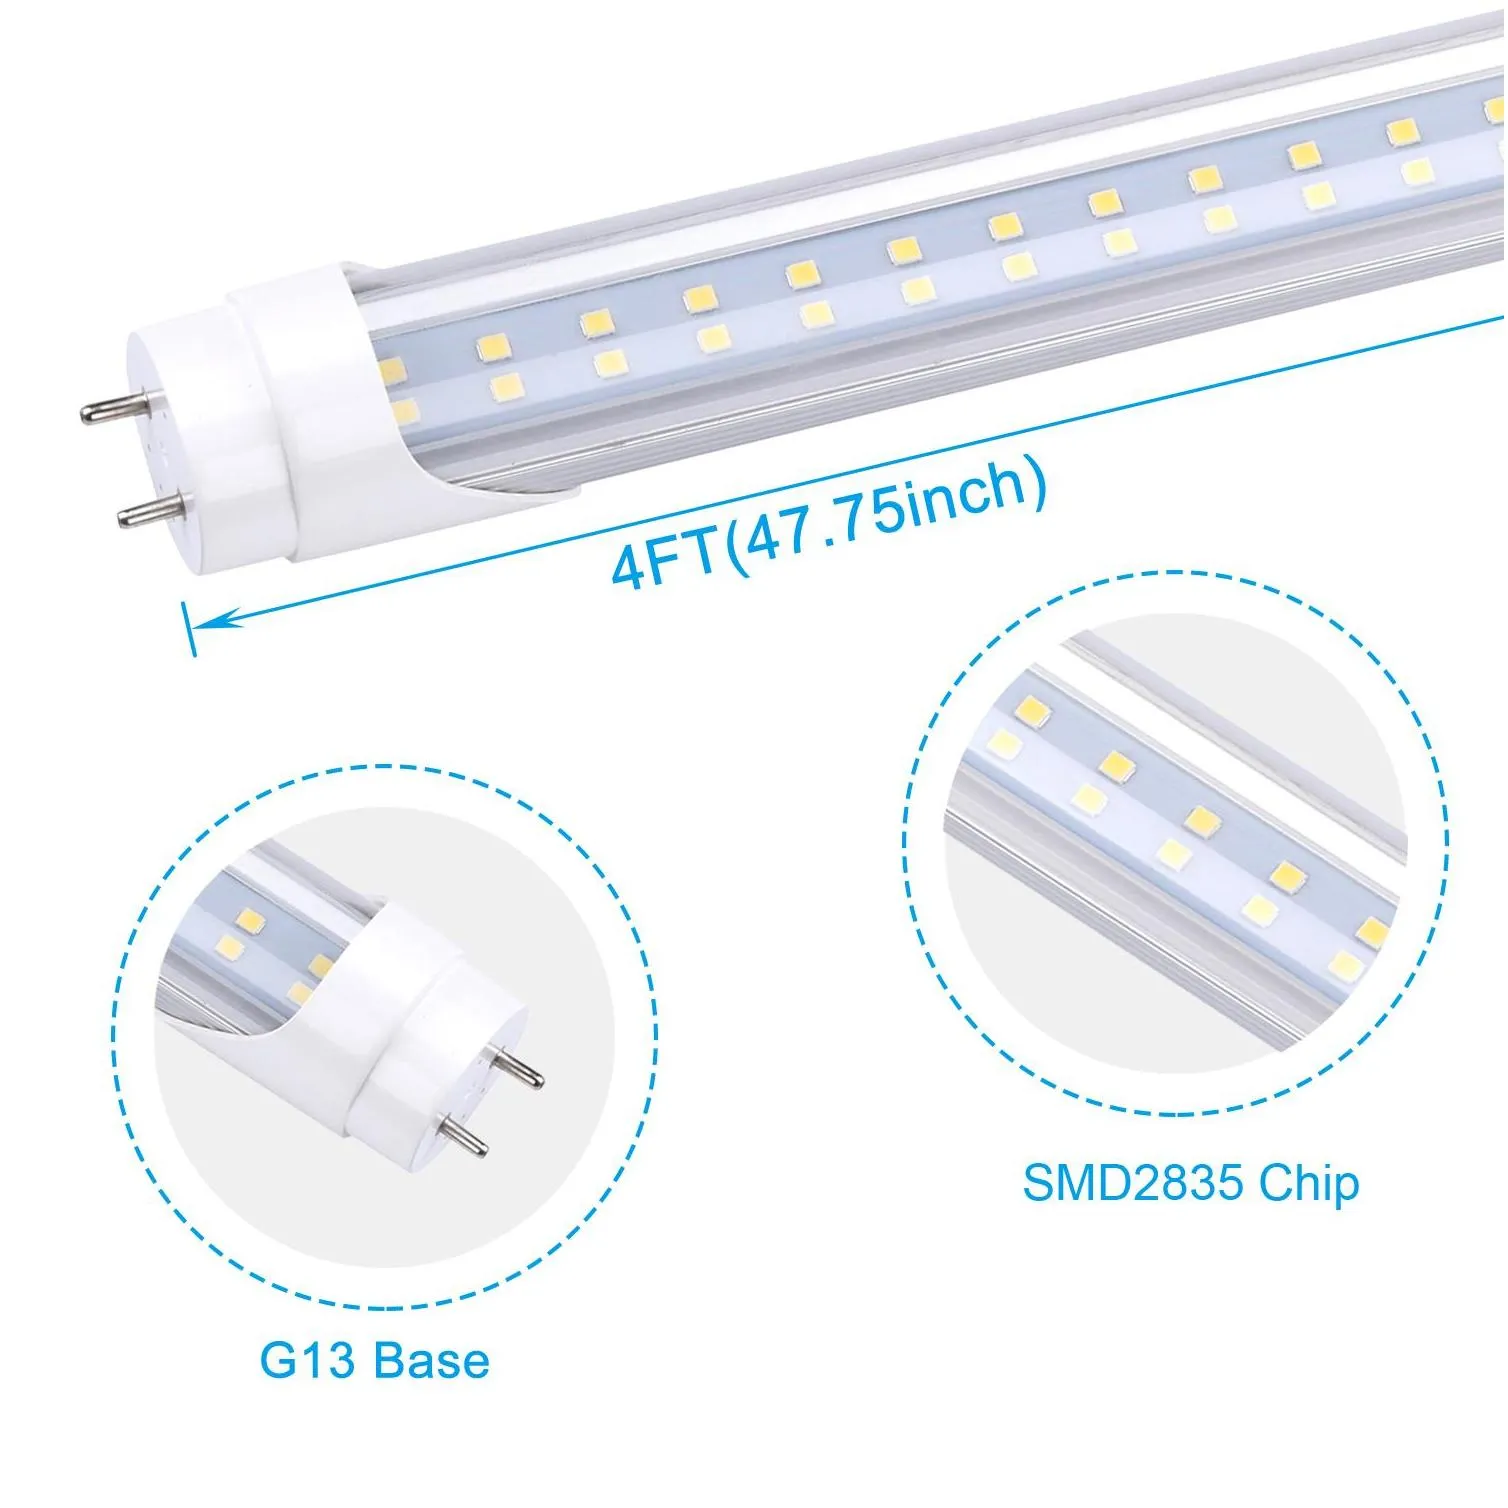 4ft led tube light bulbs g13 bipin 4 tubes double ended power require ballast bypassing 48 inch t8 t10 t12 fluorescent lights